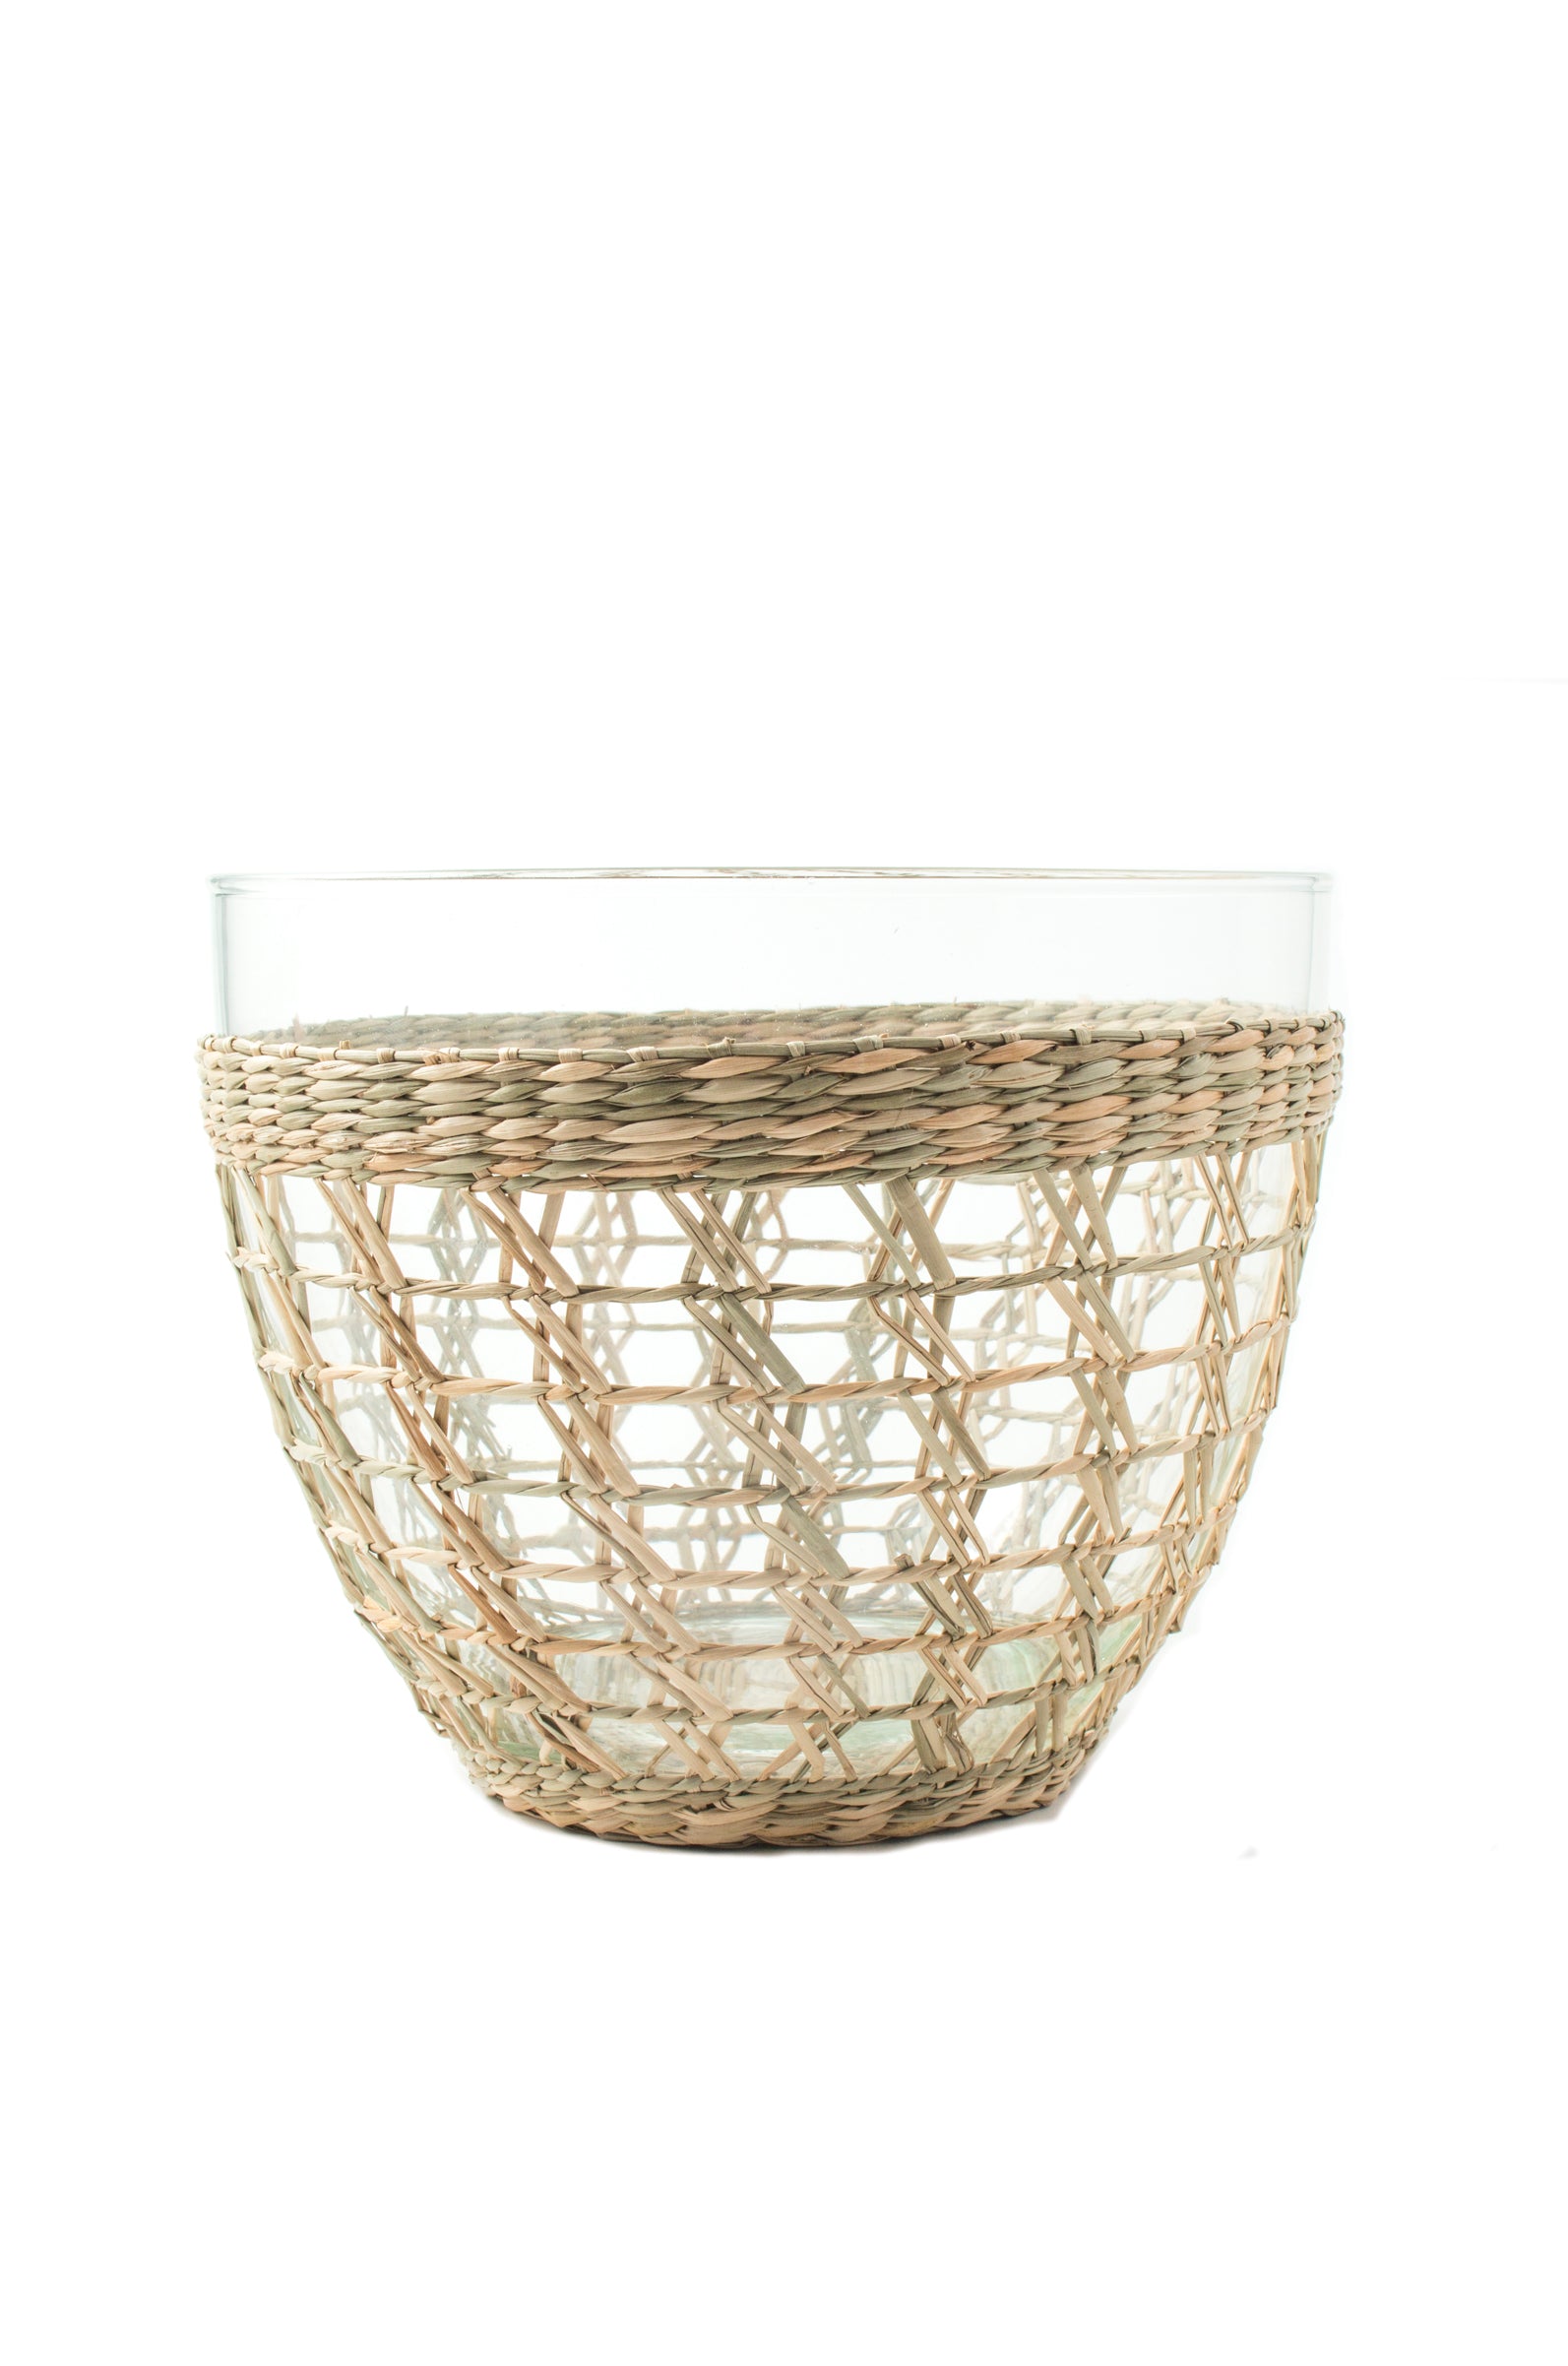 Seagrass Large Cage Salad Bowl Glass Seagrass Brand_Seagrass & Rattan Kitchen_Serveware Serving Pieces 6880-T8542